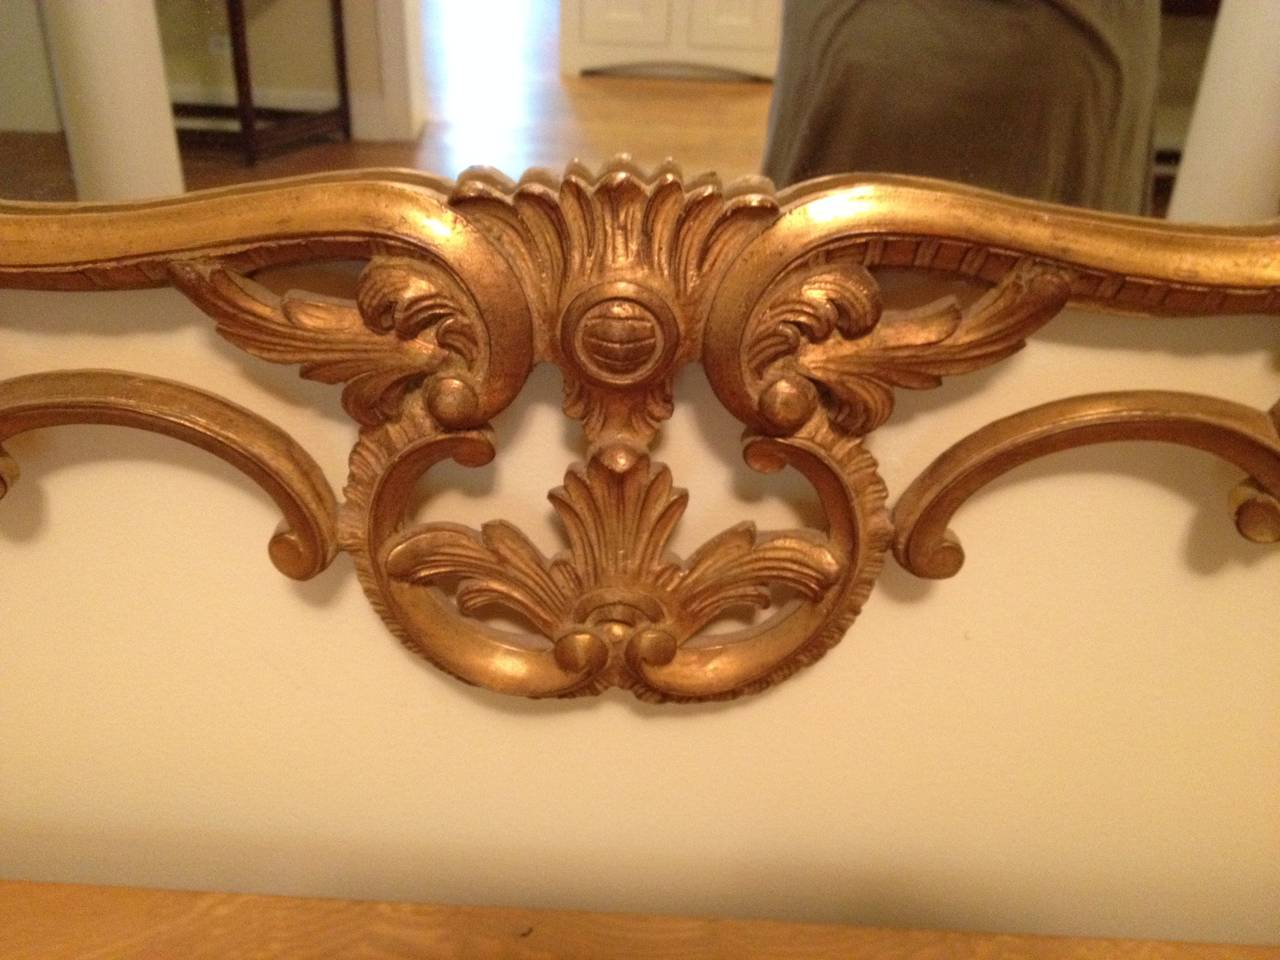 Chippendale Giltwood Mirror by Carvers' Guild